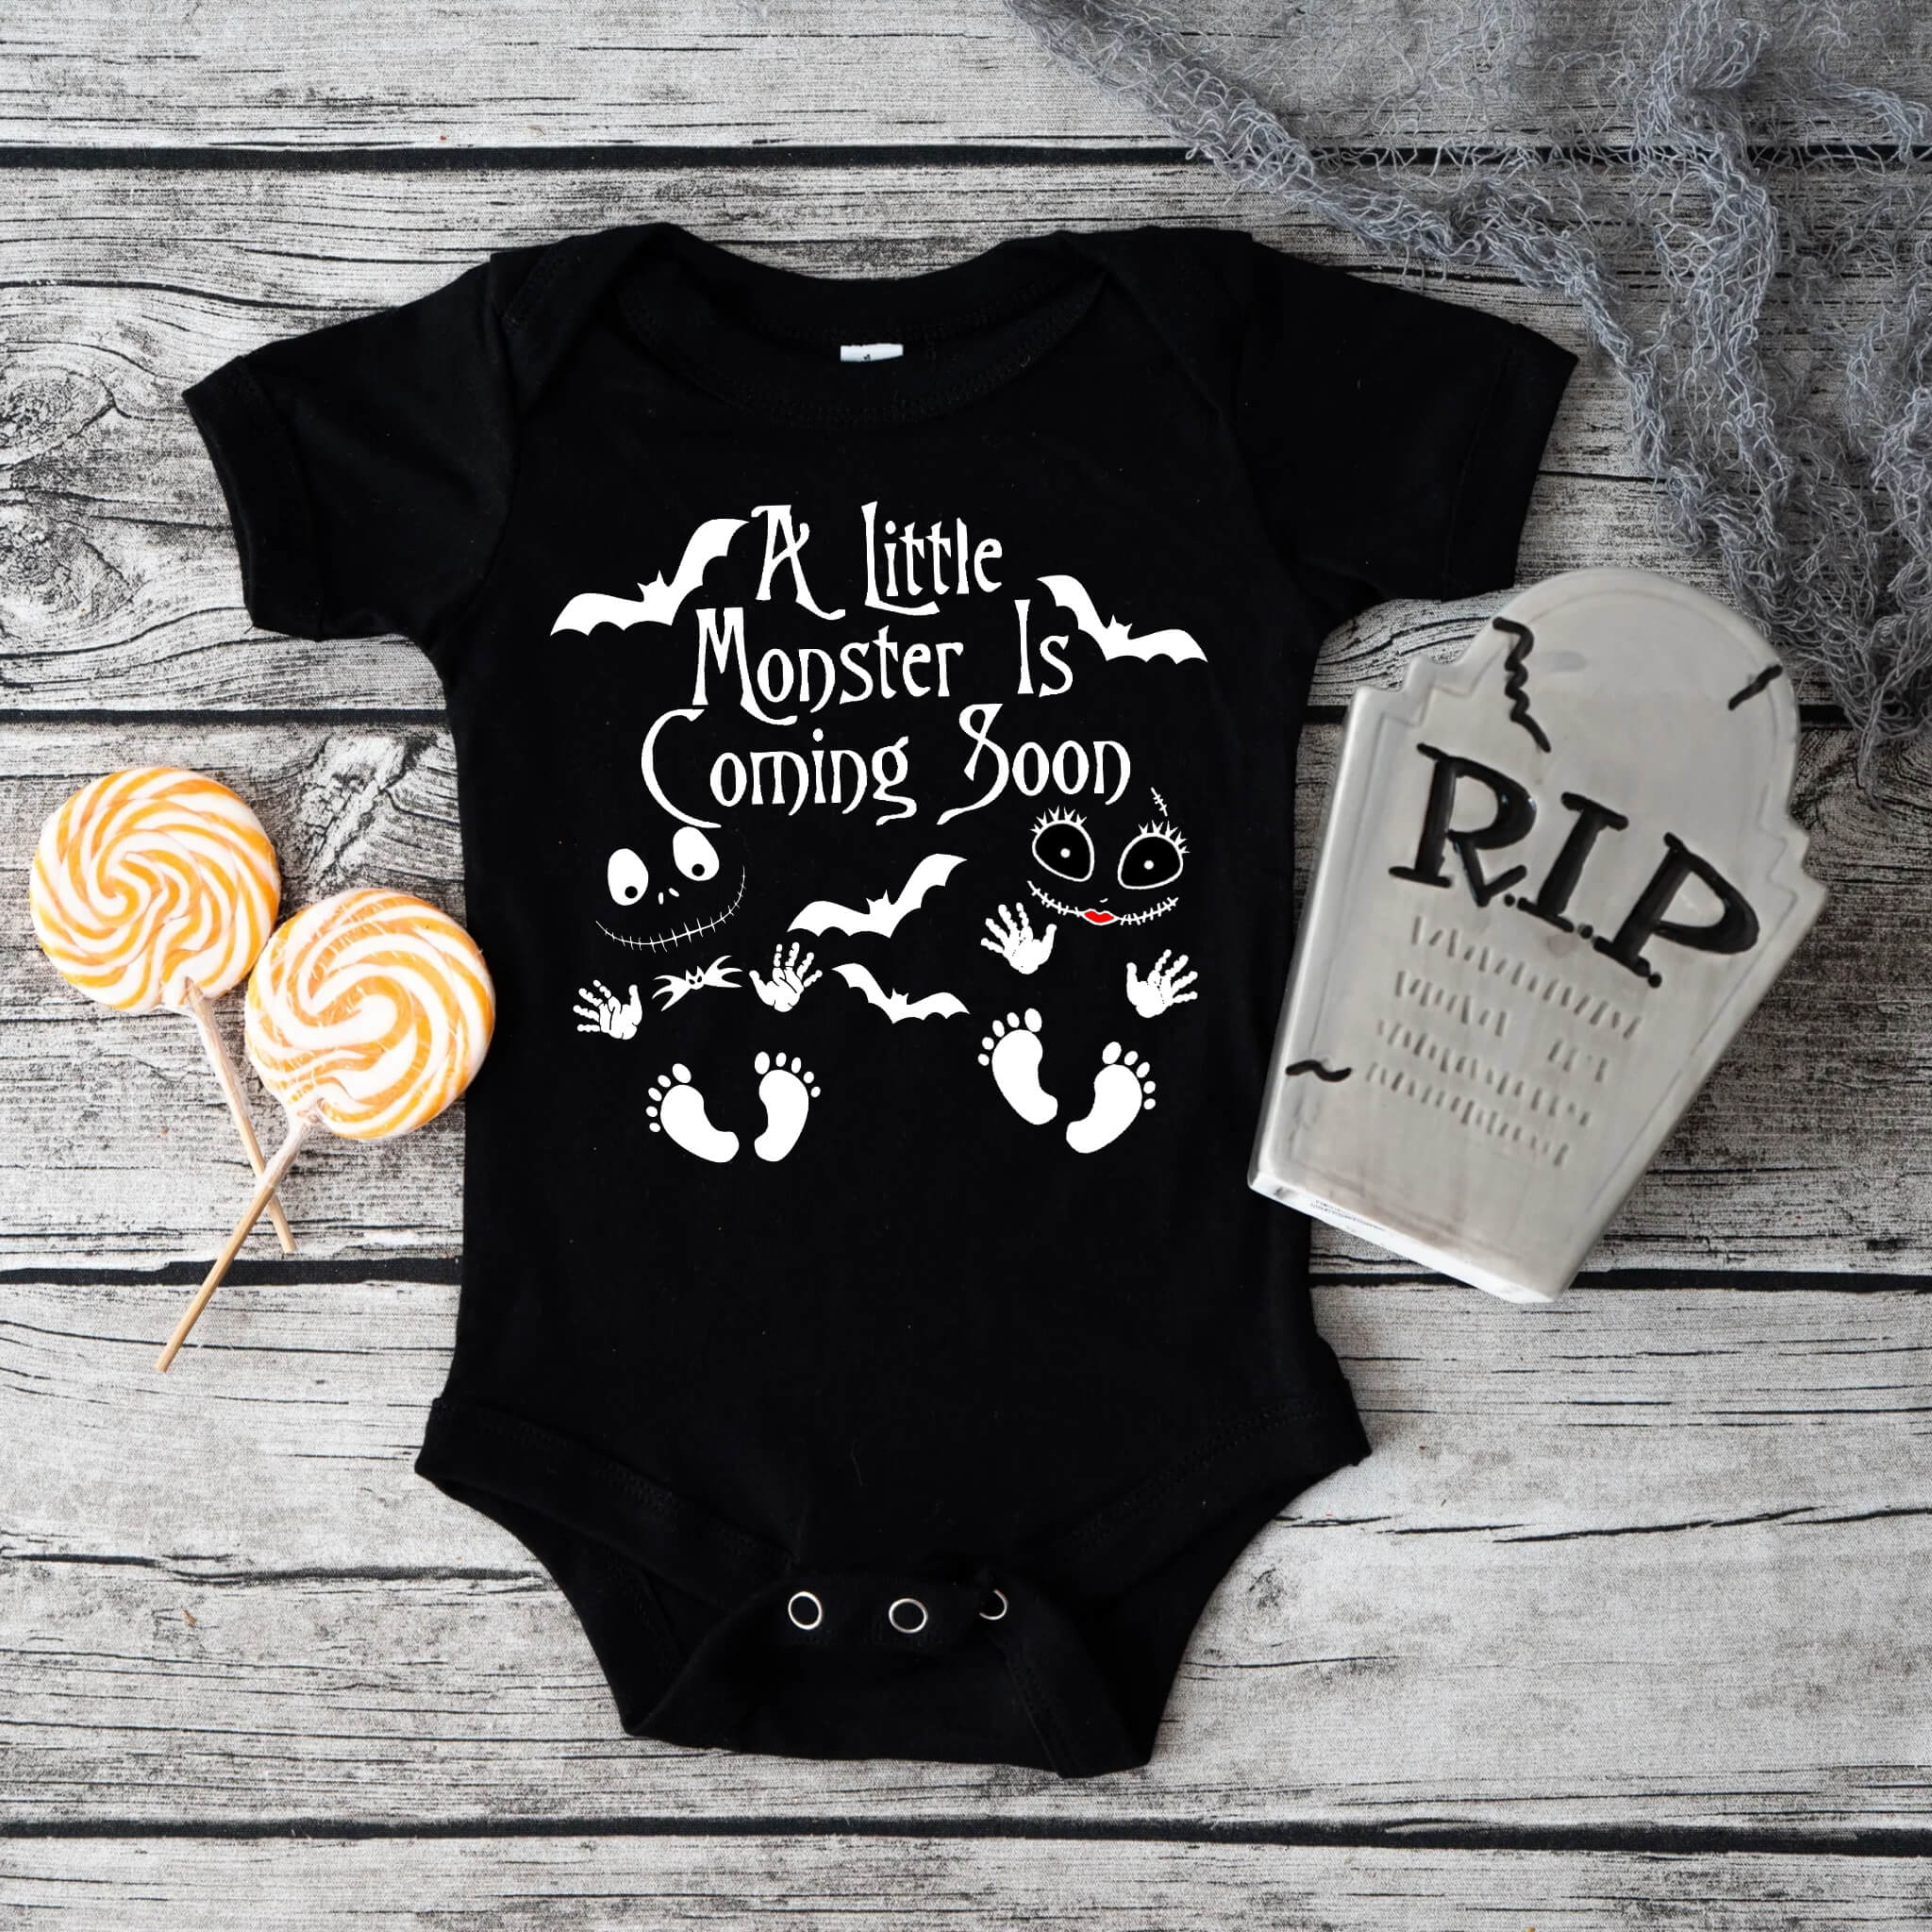 Personalized Pregnancy Announcement, Jack Skellington & Sally, Nightmare Before Christmas Themed